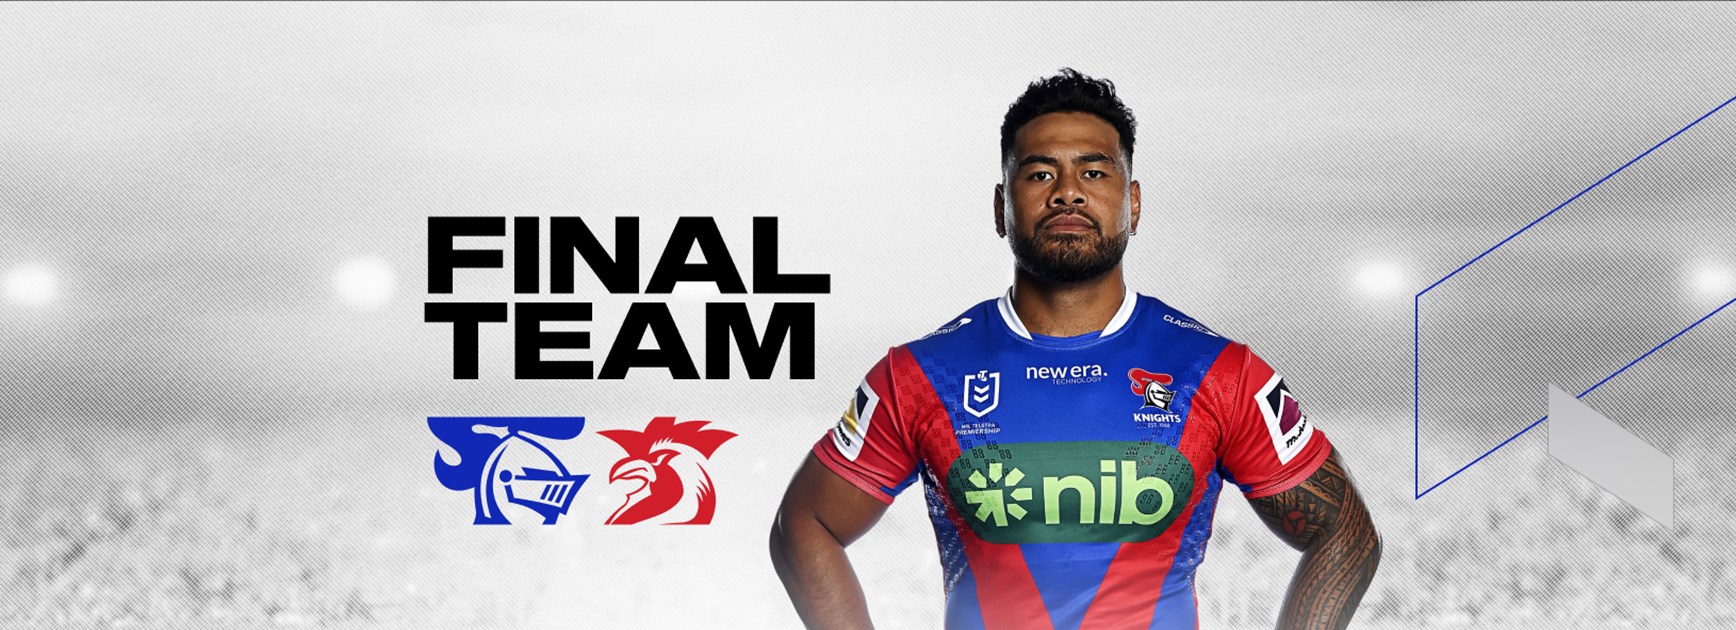 NRL Final Team: Knights v Roosters